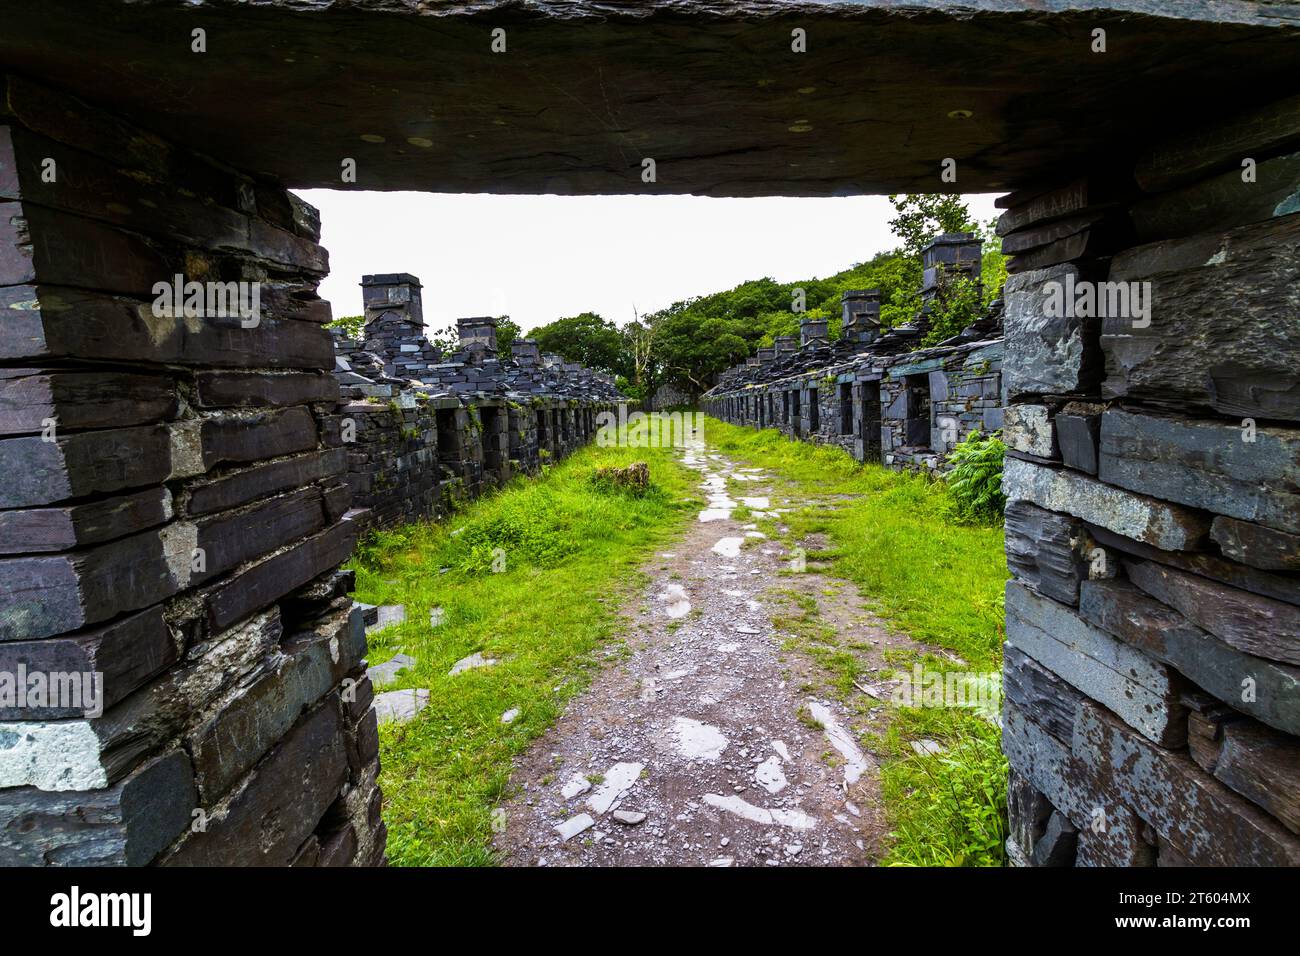 Entrance to Anglesey Barracks, derelict accommodation at Dinorwic slate quarry in Snowdonia or Eryri National Park, North Wales, UK, landscape Stock Photo